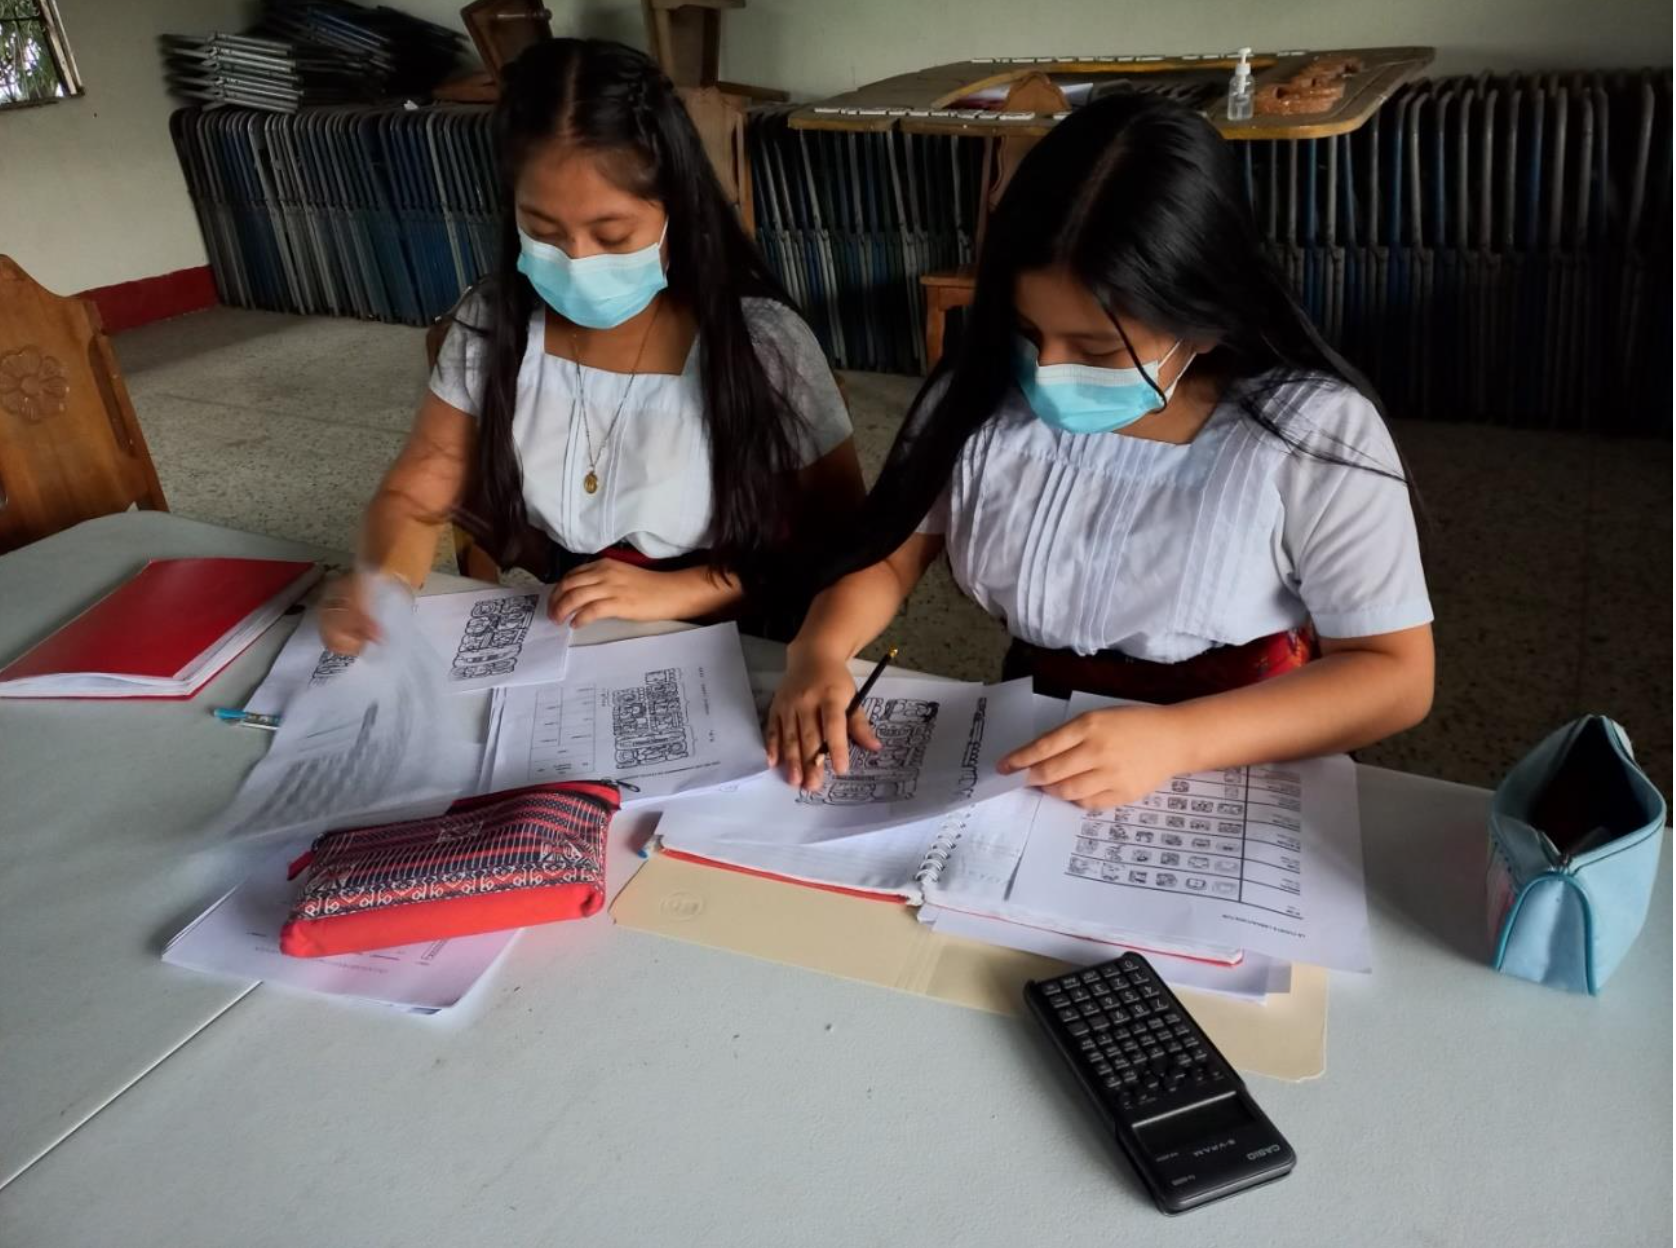 A couple of women wearing masks and looking at papers on a table

Description automatically generated with low confidence